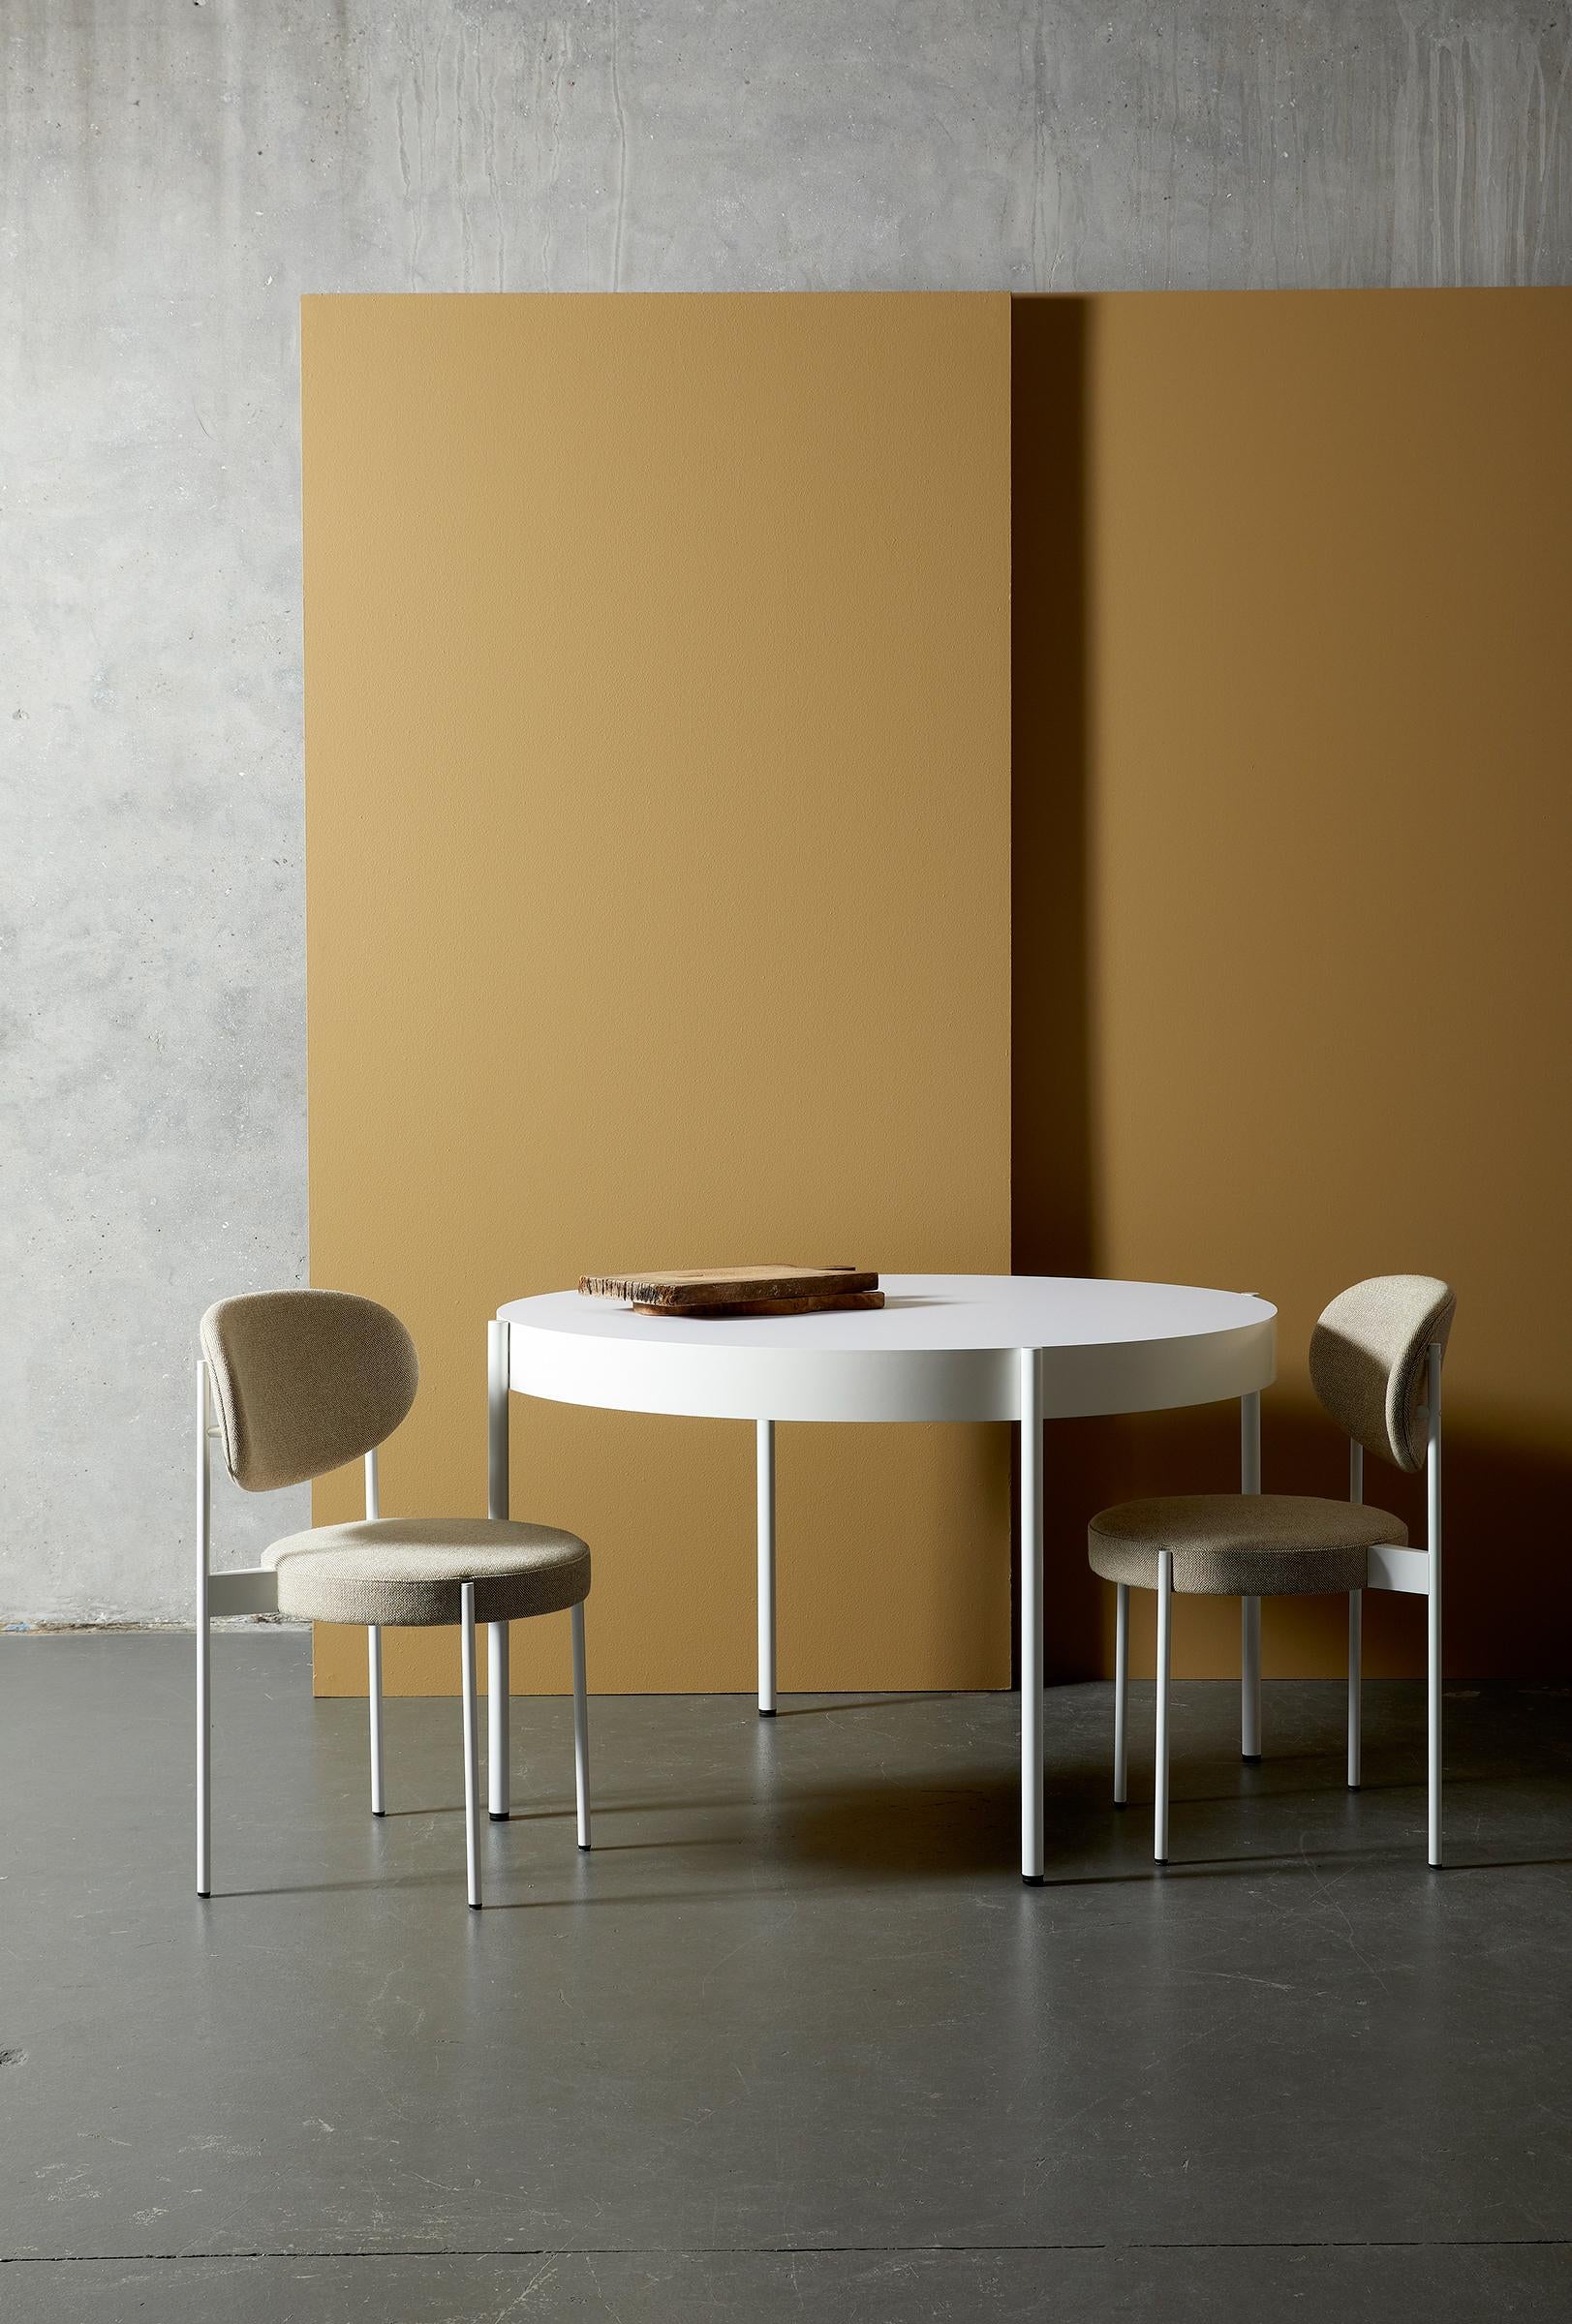 Round dining table with obvious frame. Legs placed outside the frame of the table designed by Verner Panton.

Material:
Frame: Black or white painted metal legs
White: RAL 9016 
Edge: Painted MDF
Table top: Fenix laminate 

Color:
Tabletop: